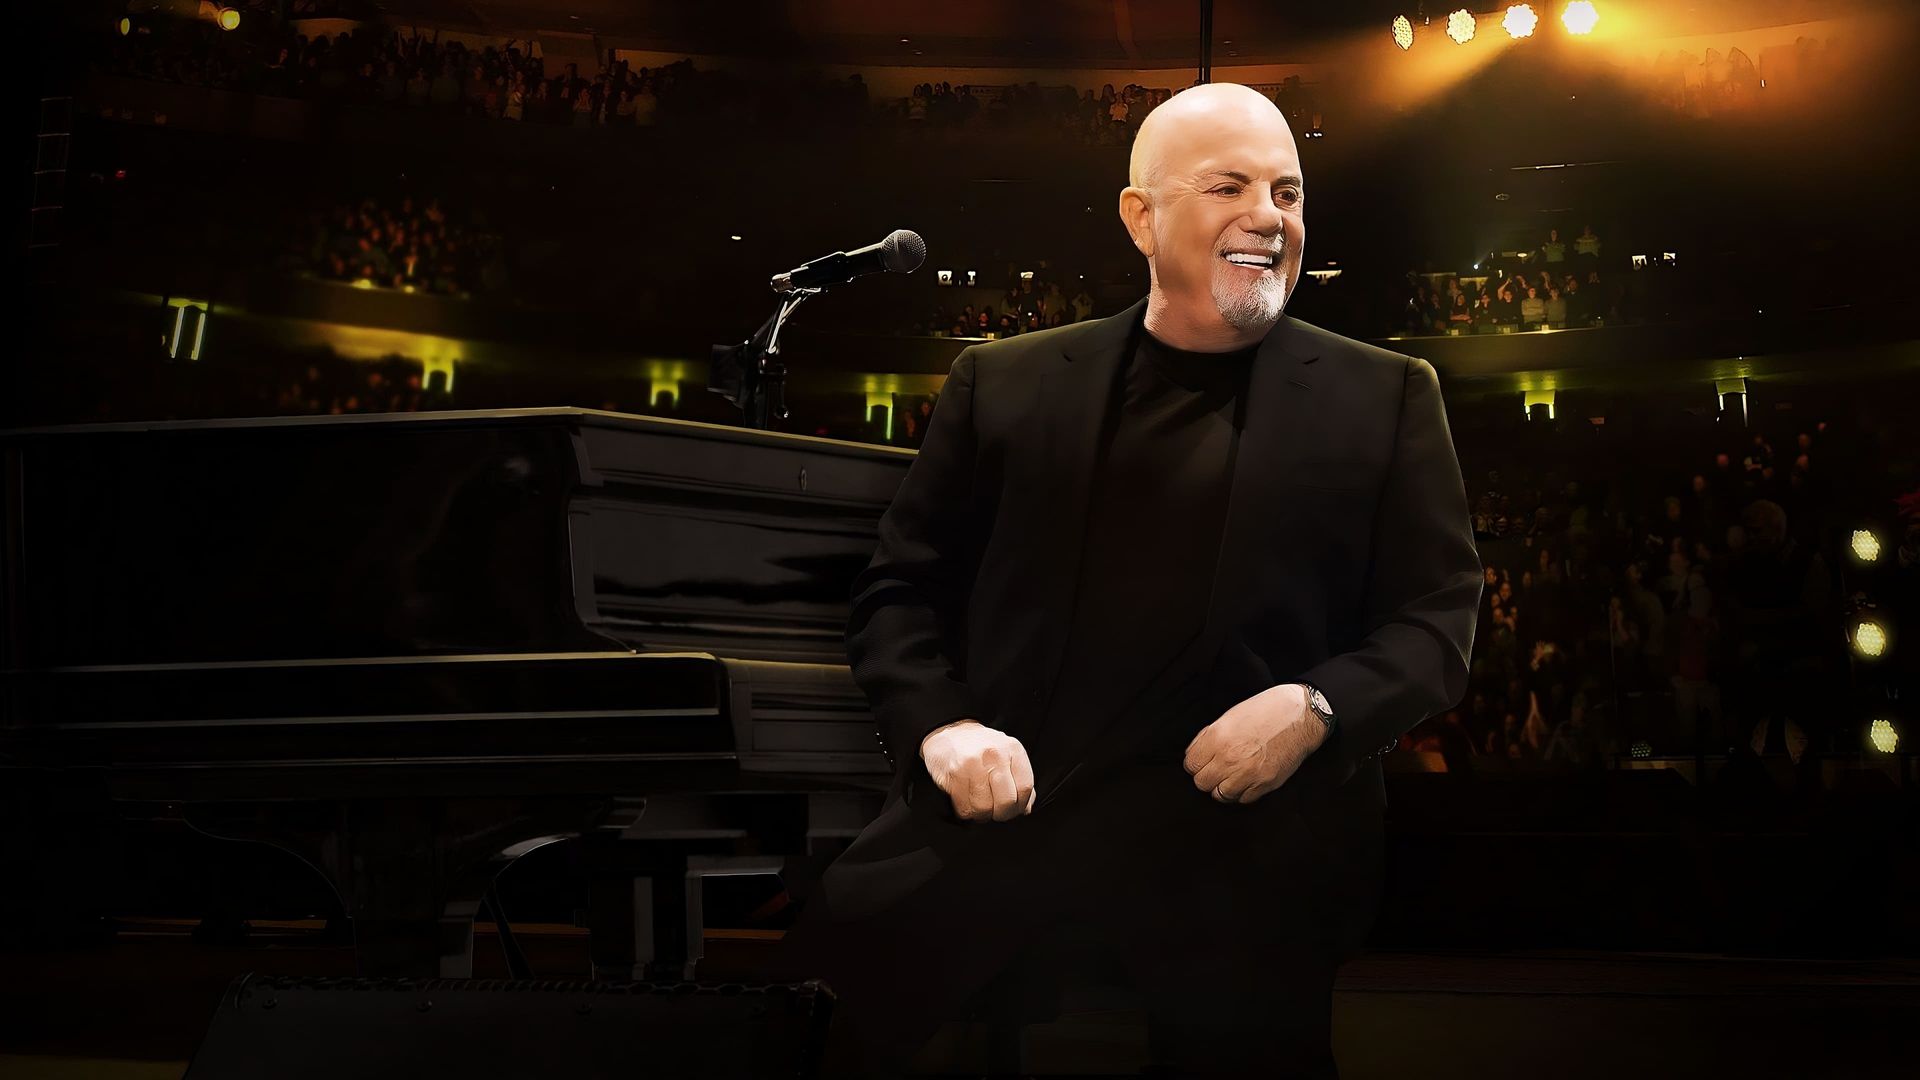 The 100th: Billy Joel at Madison Square Garden - The Greatest Arena Run of All Time background